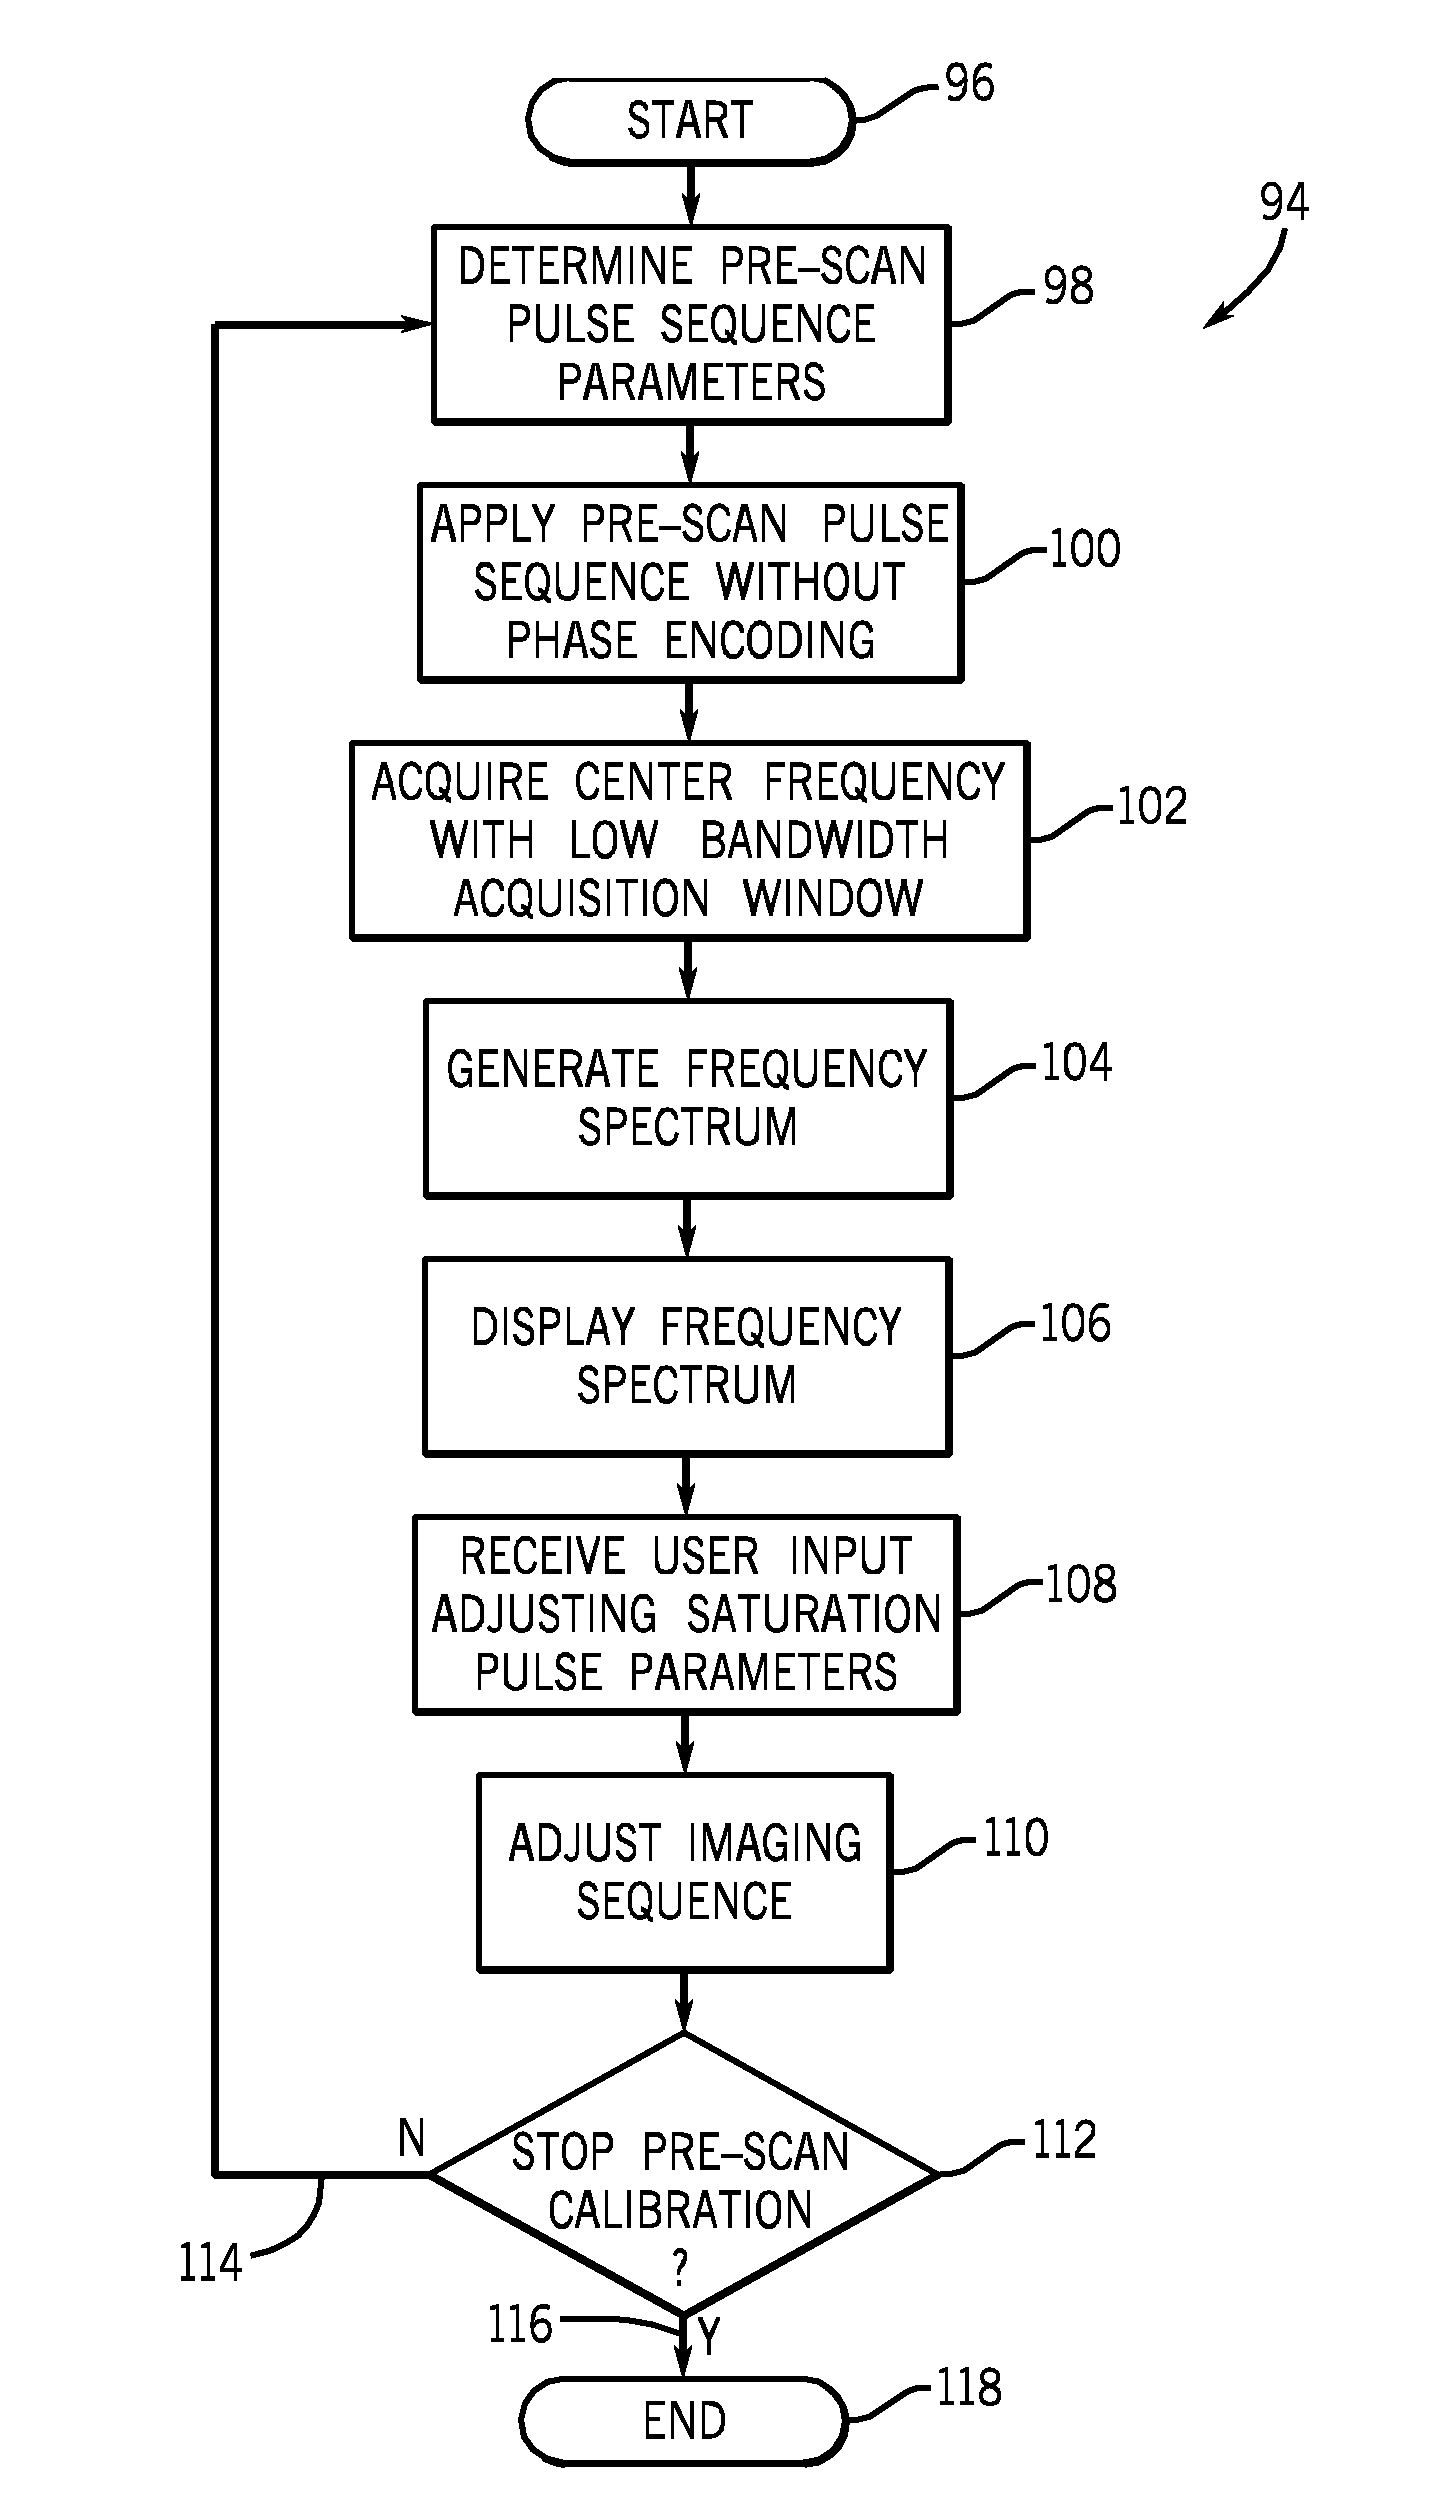 Method and apparatus for interactively setting parameters of an MR imaging sequence through inspection of frequency spectrum